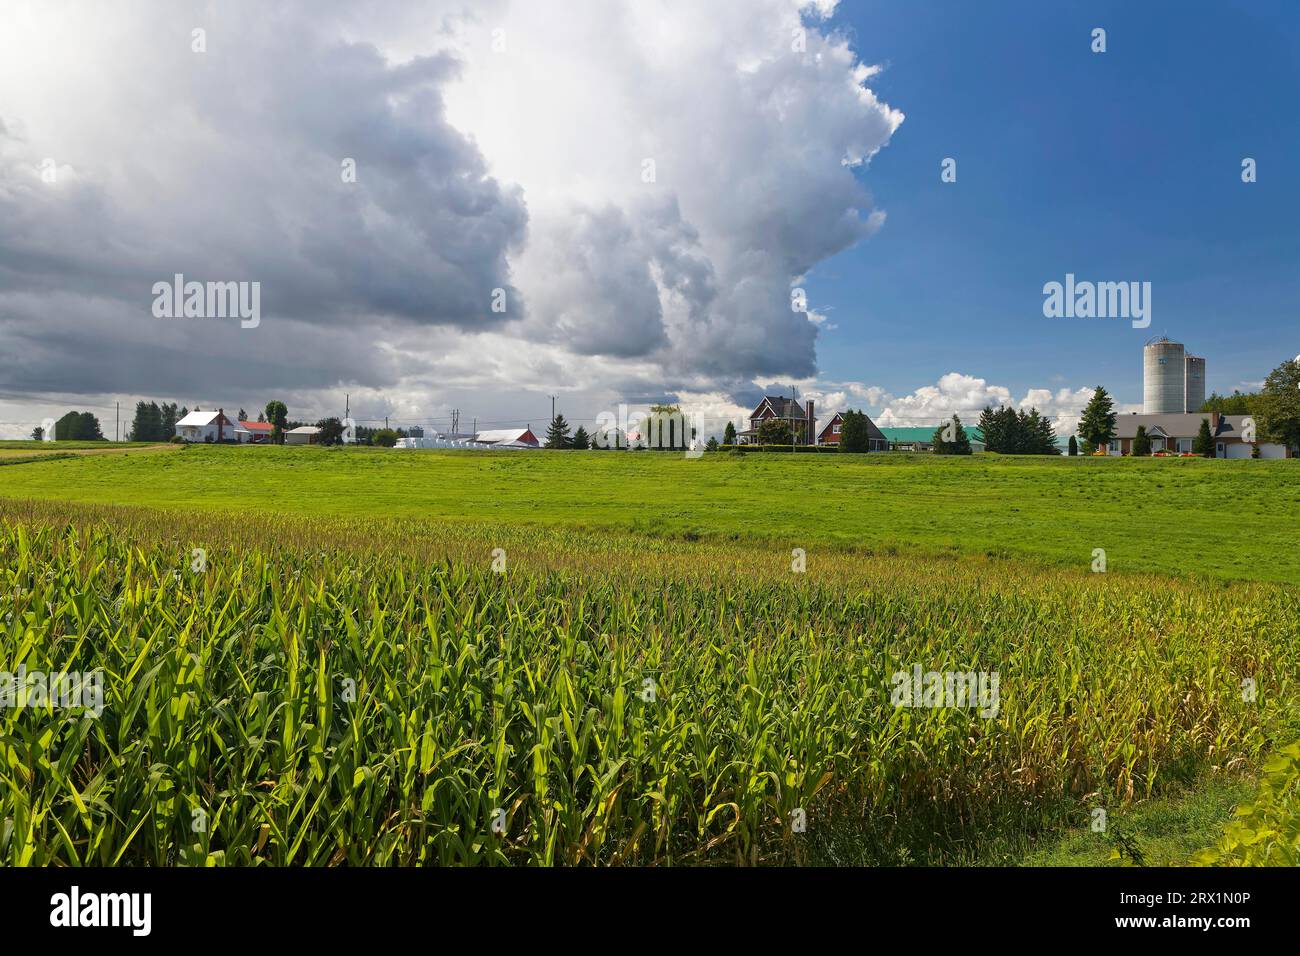 Agriculture, buildings, corn field, farmland, Province of Quebec, Canada Stock Photo